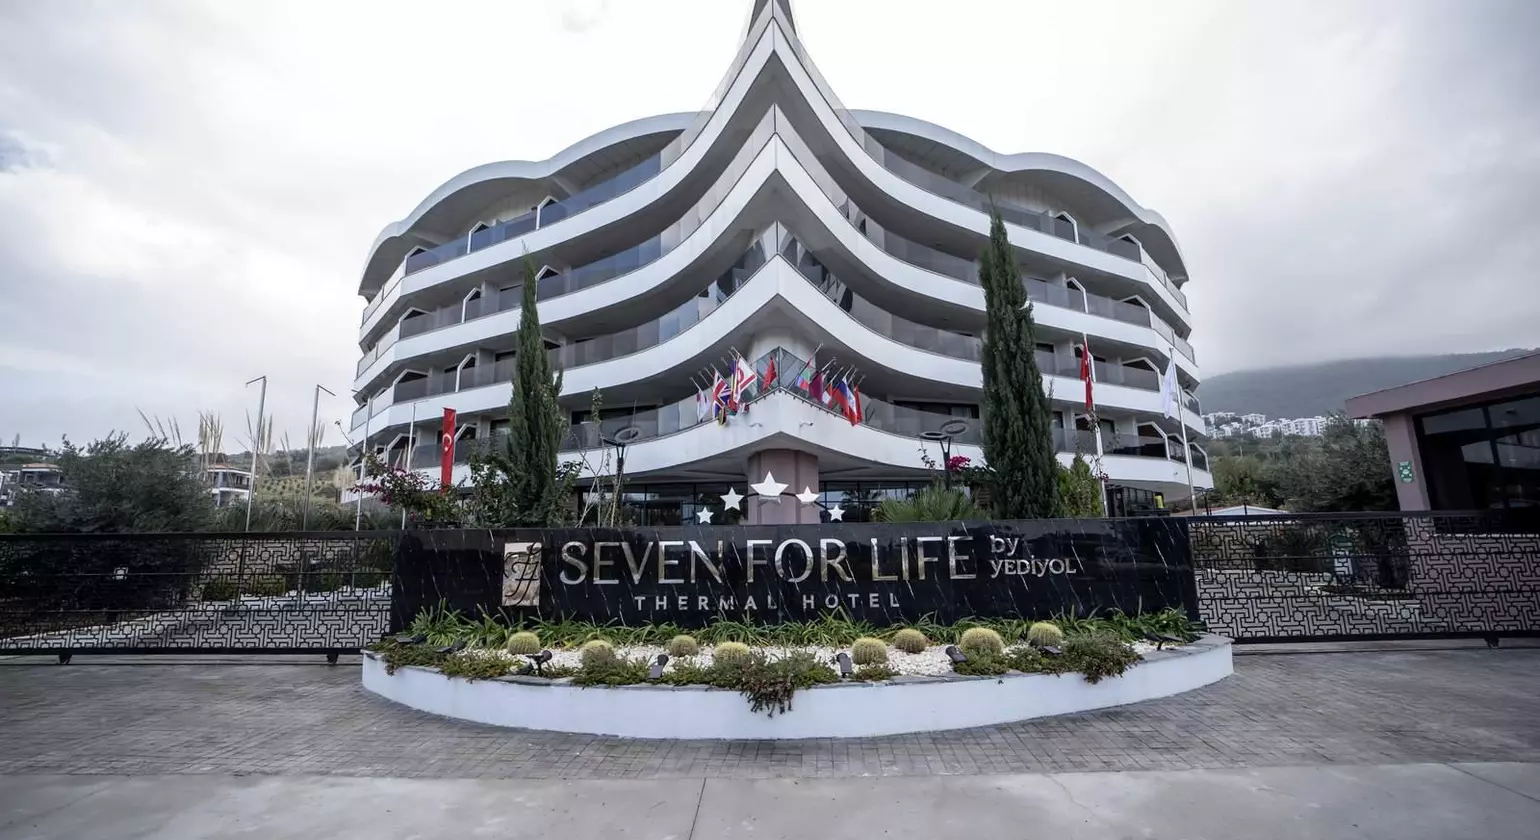 Seven for Life Thermal Hotel